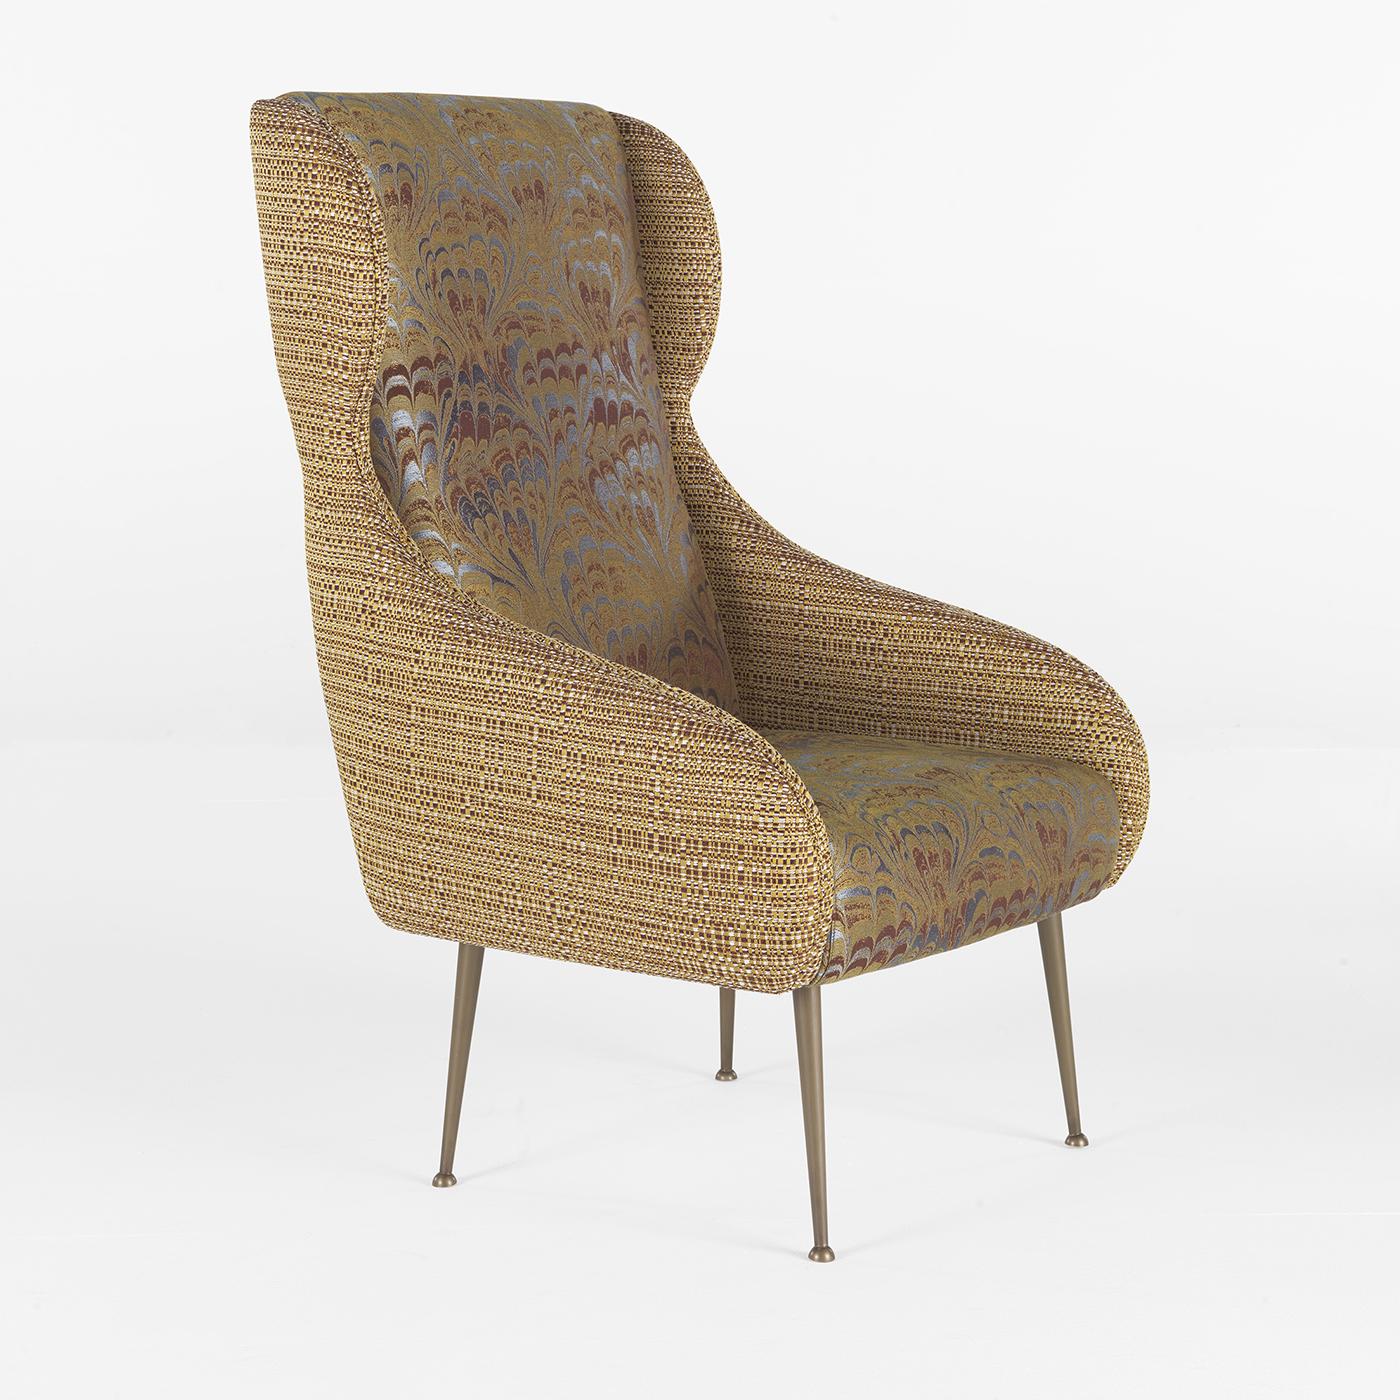 A tall back, enveloping armrests, and a charming midcentury allure are the features of this superb armchair, whose standout element is its stunning upholstery, combining a marbled-like fabric for the seat and internal back, and a textured solid